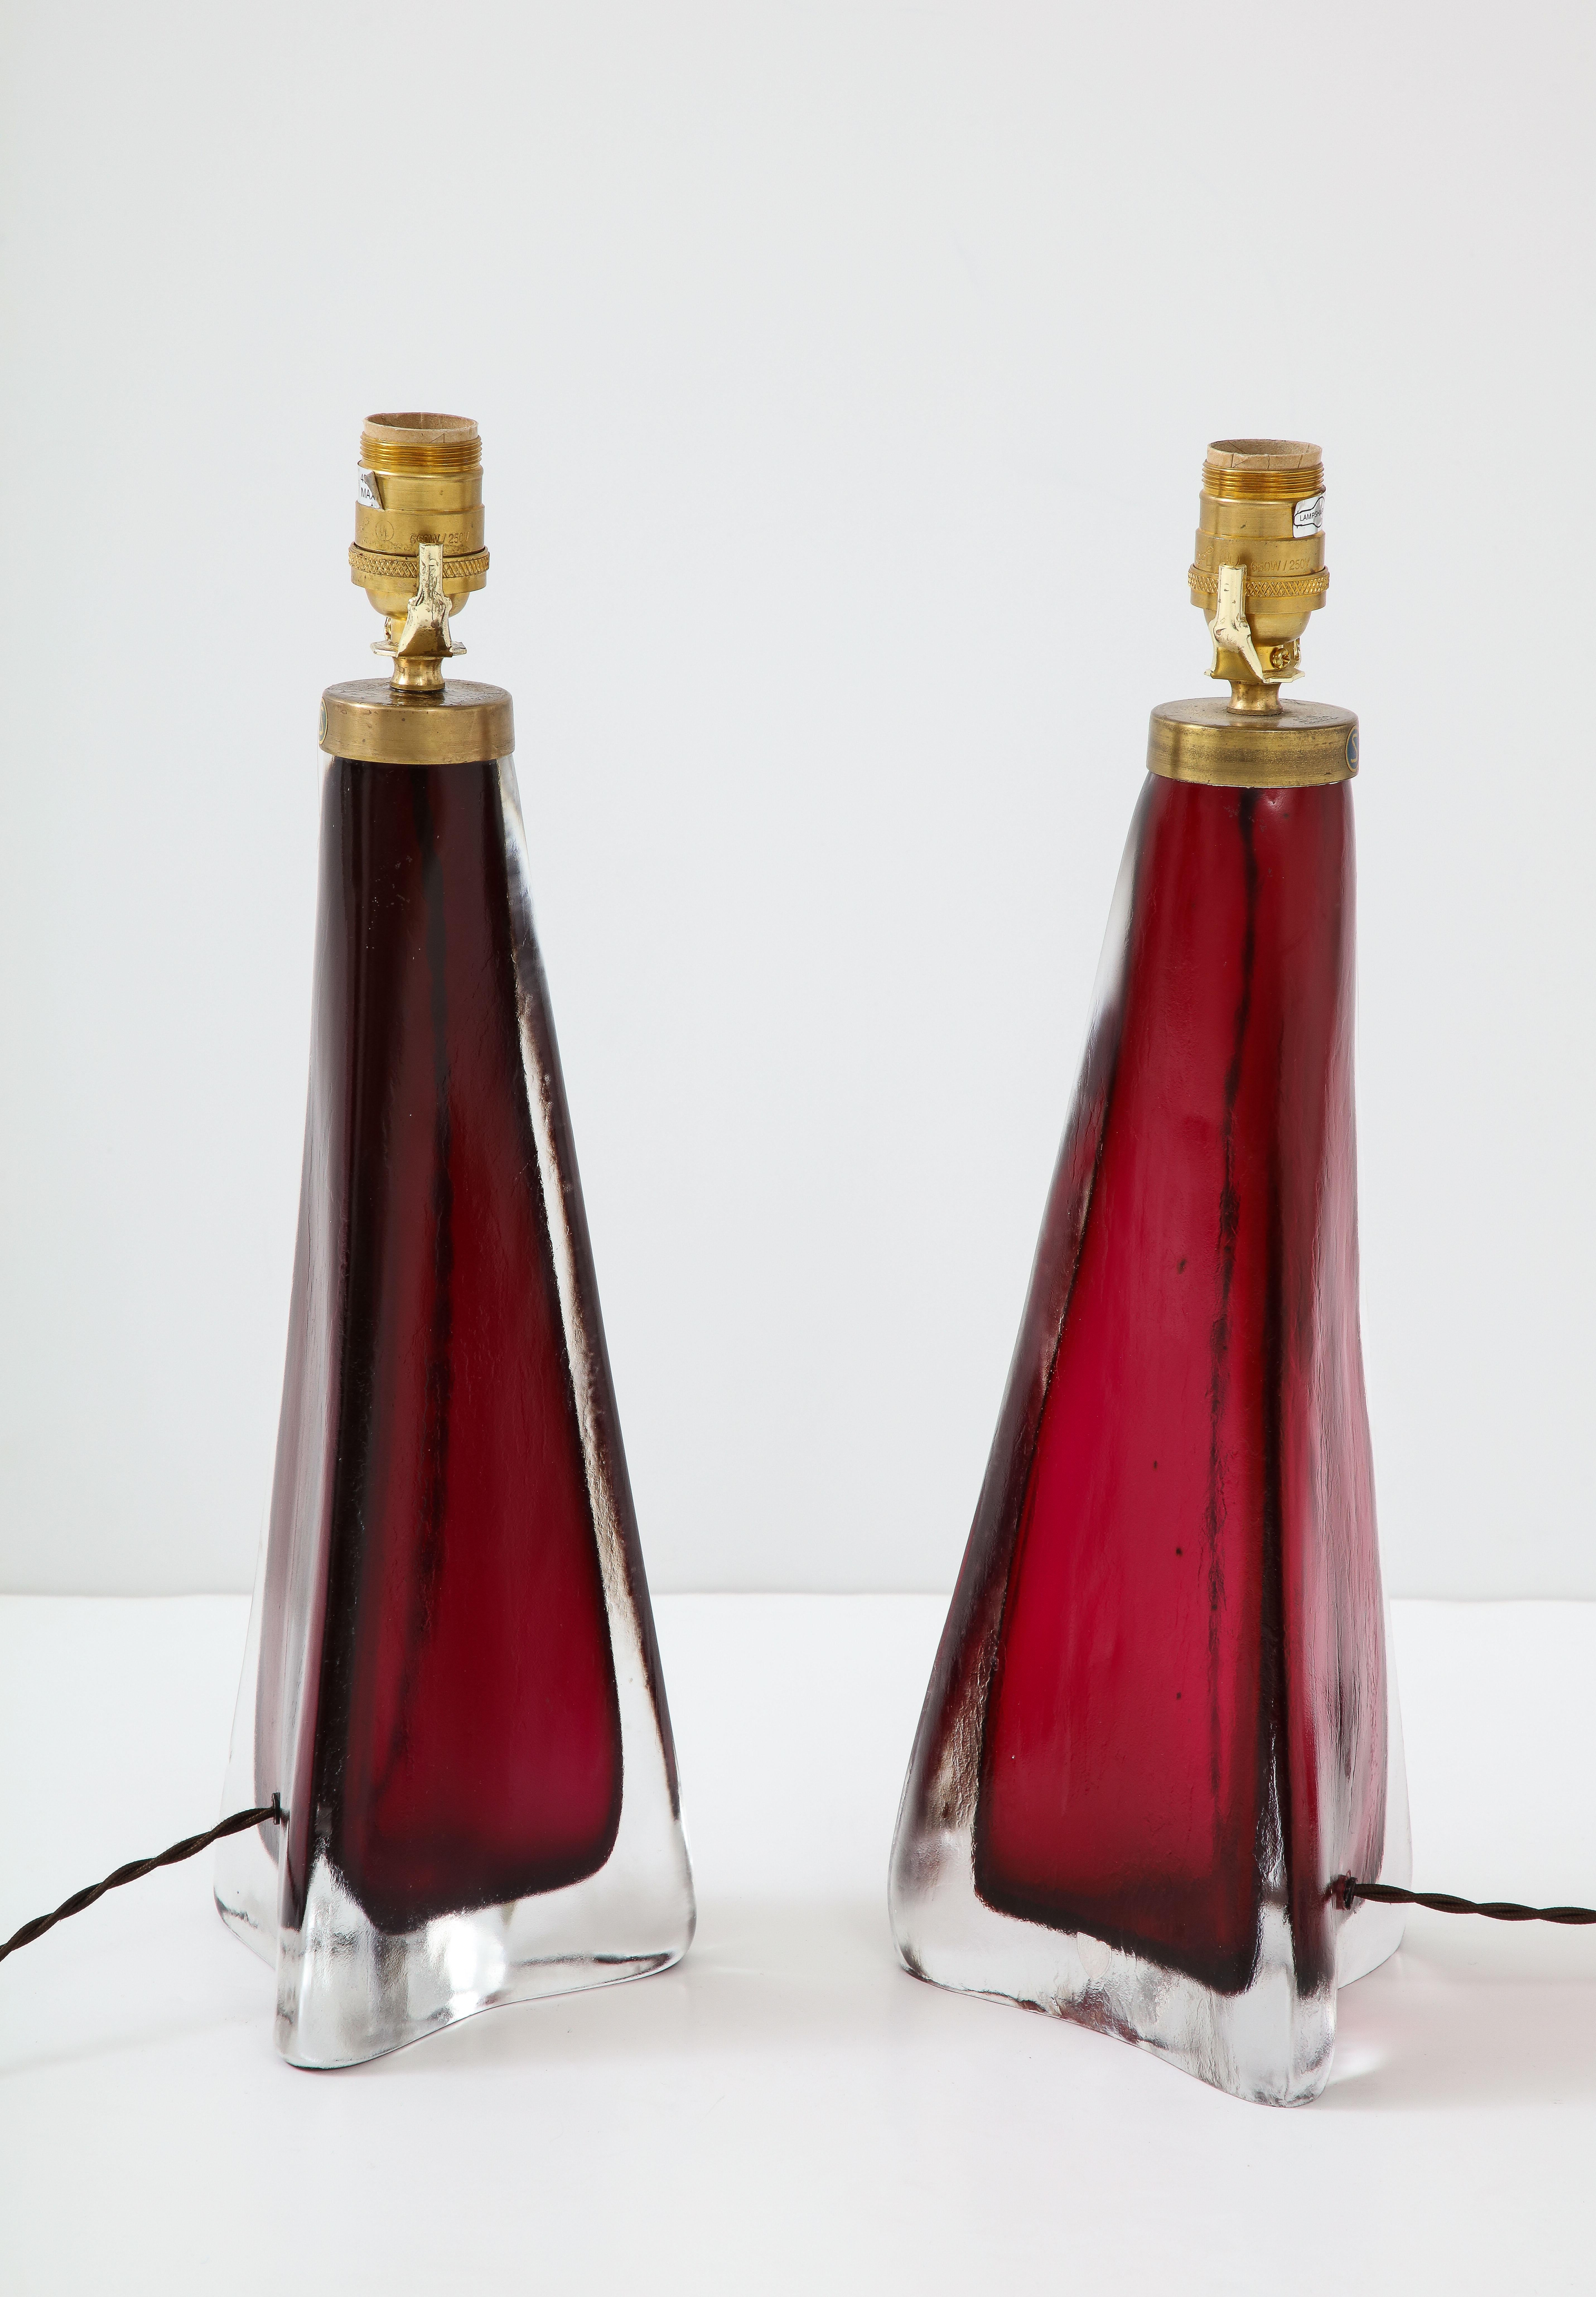 A stunning pair of Orrefors crystal lamps in a beautiful, deep shade of red with brass fittings. More than a pair of lamps, these are works of art that will add a touch of glamour to a space.